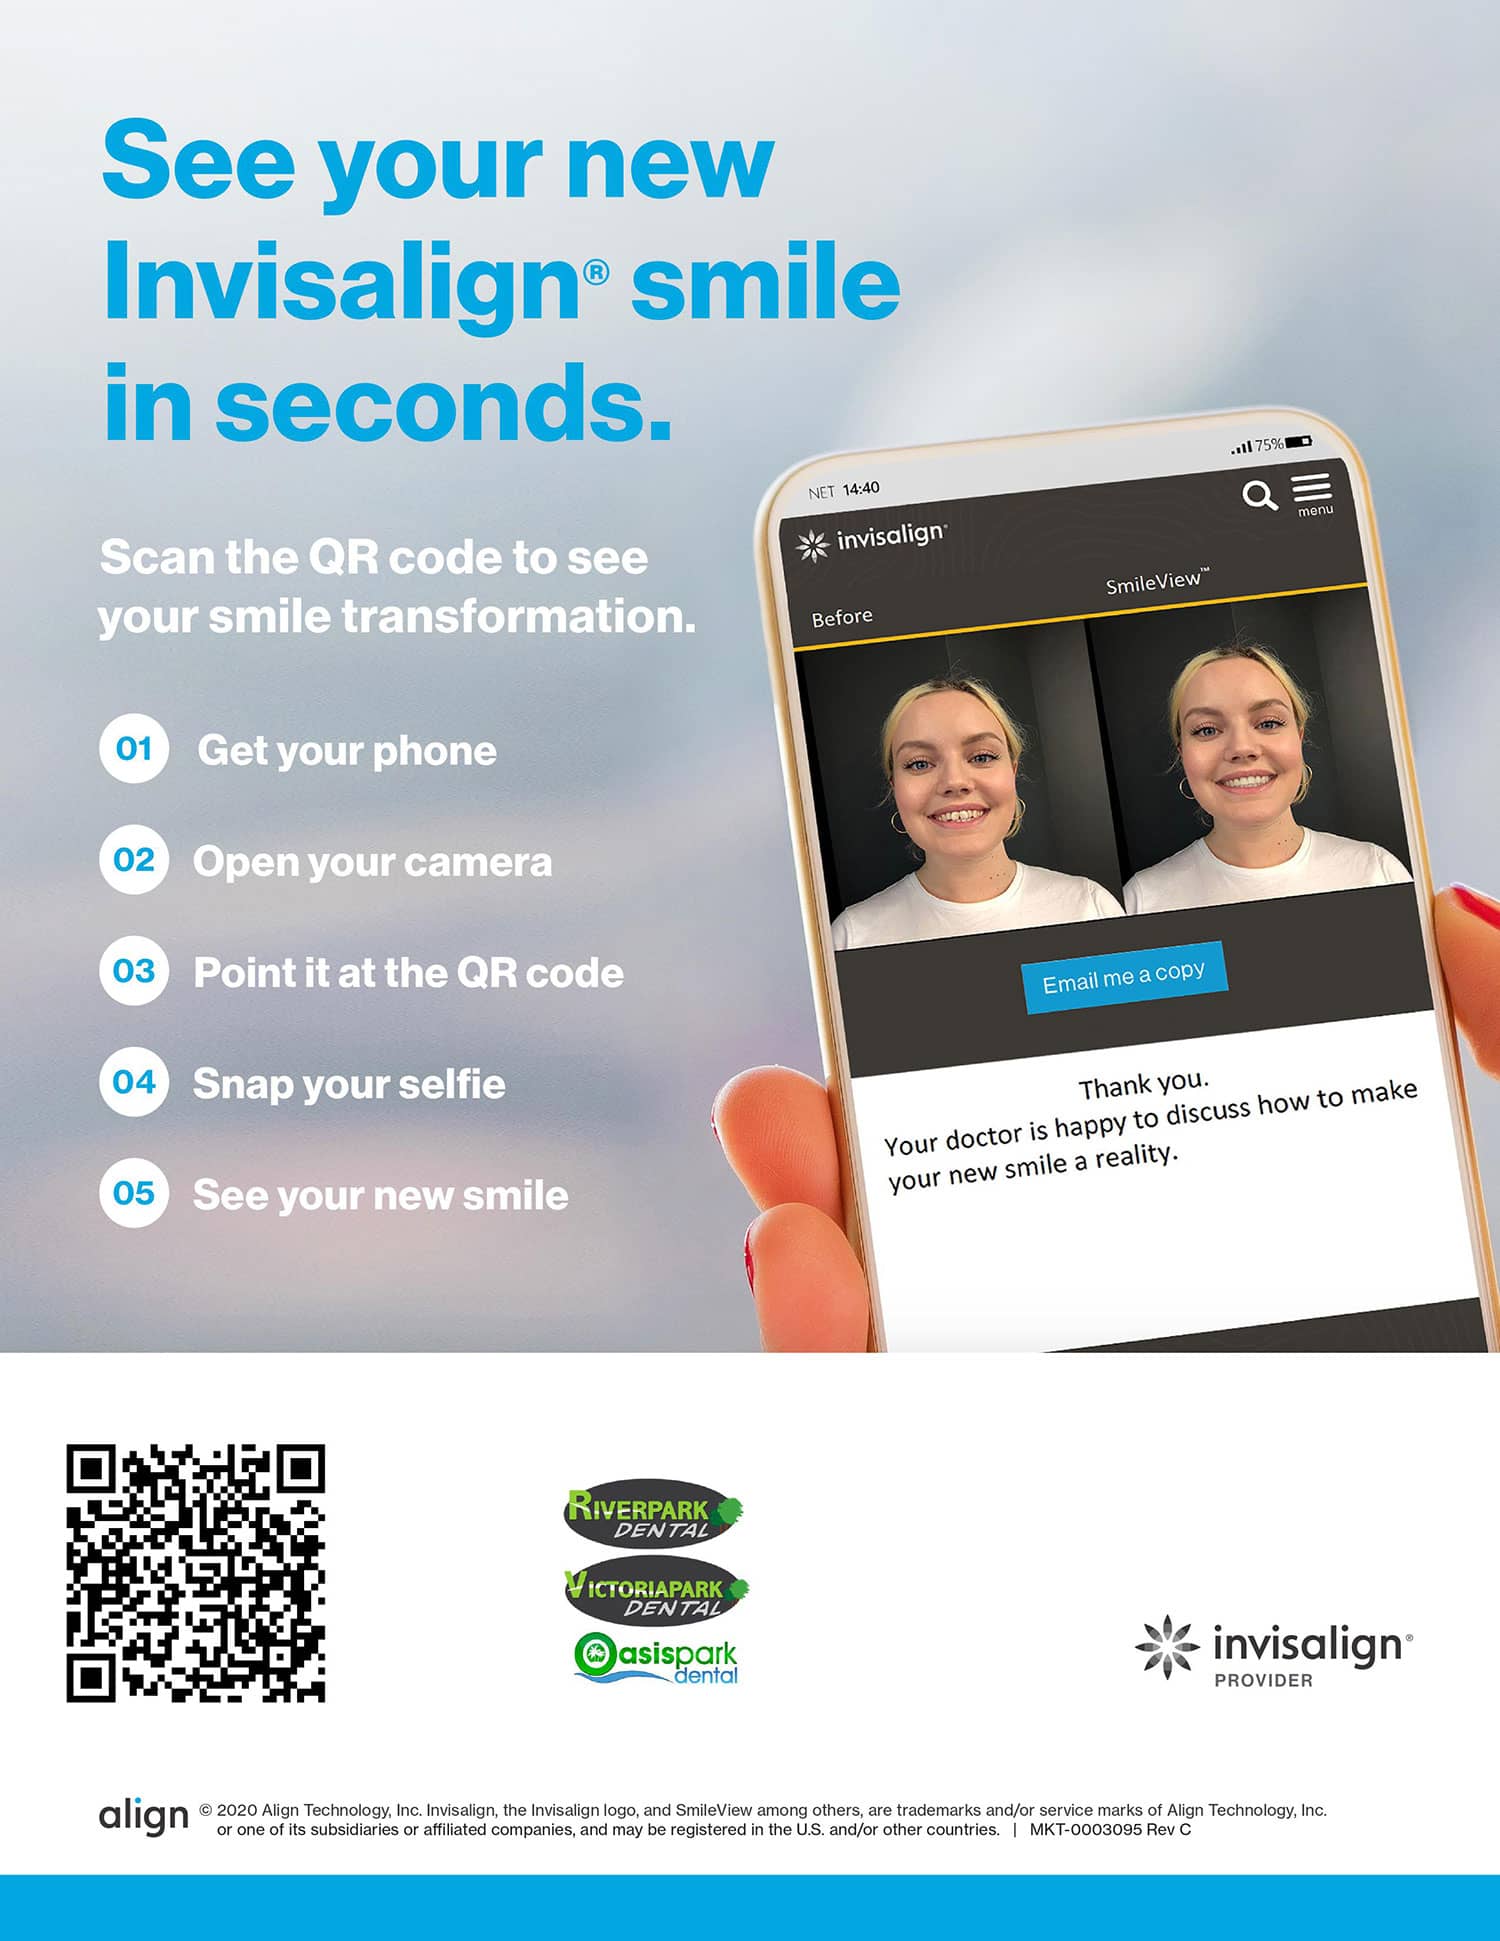 See your new Invisalign smile in seconds